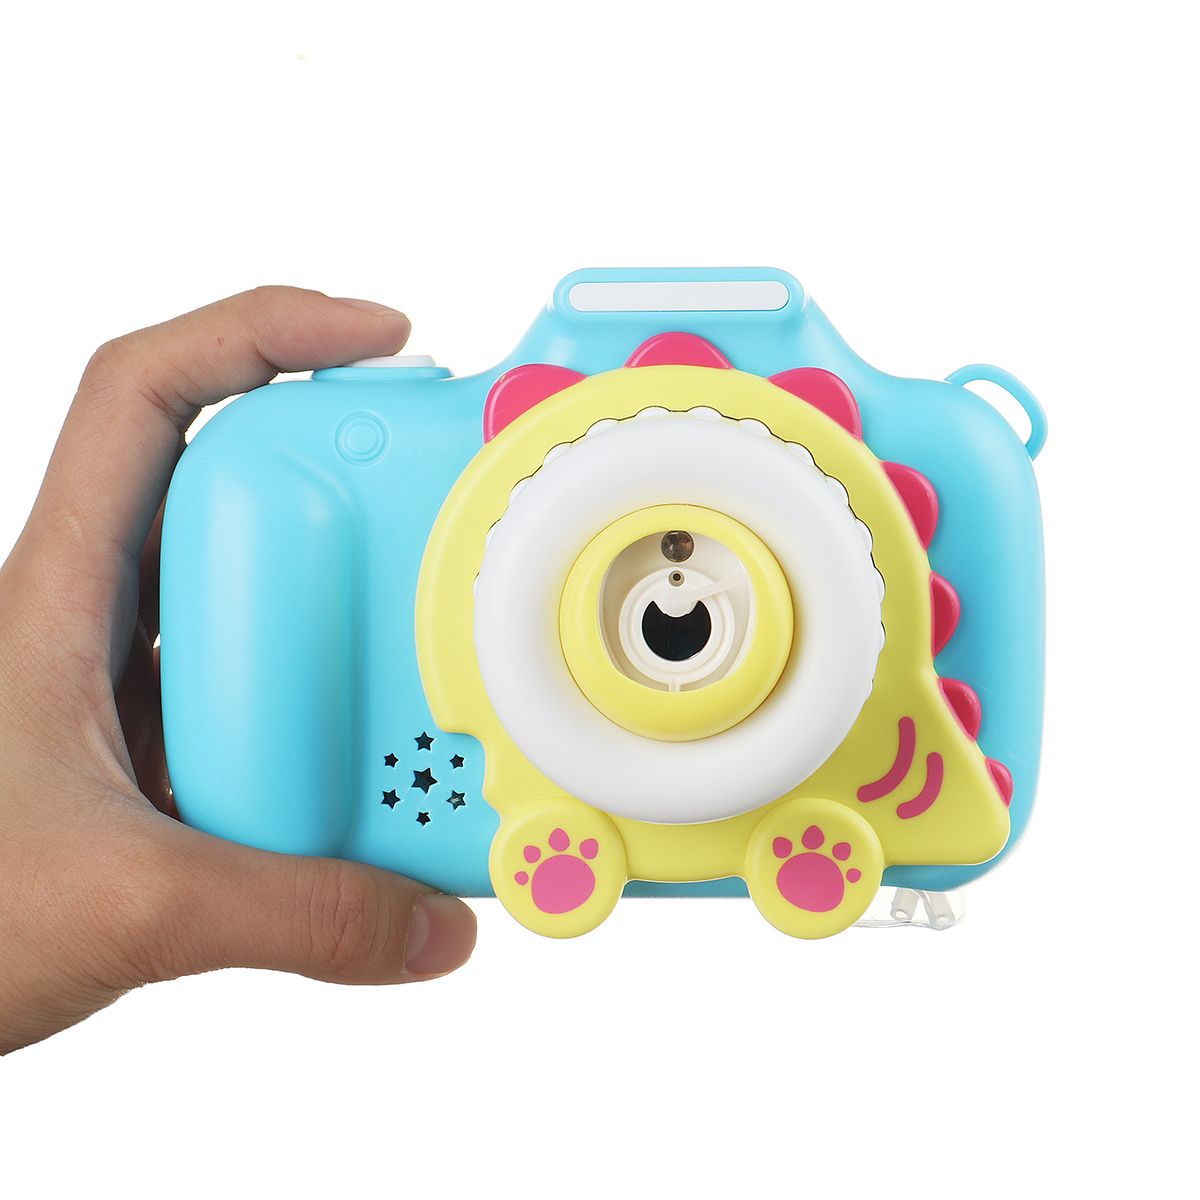 Bubble-Machine-Toy-Children-Fully-Automatic-Bubble-Blowing-Camera-Music-Lighting-1723905